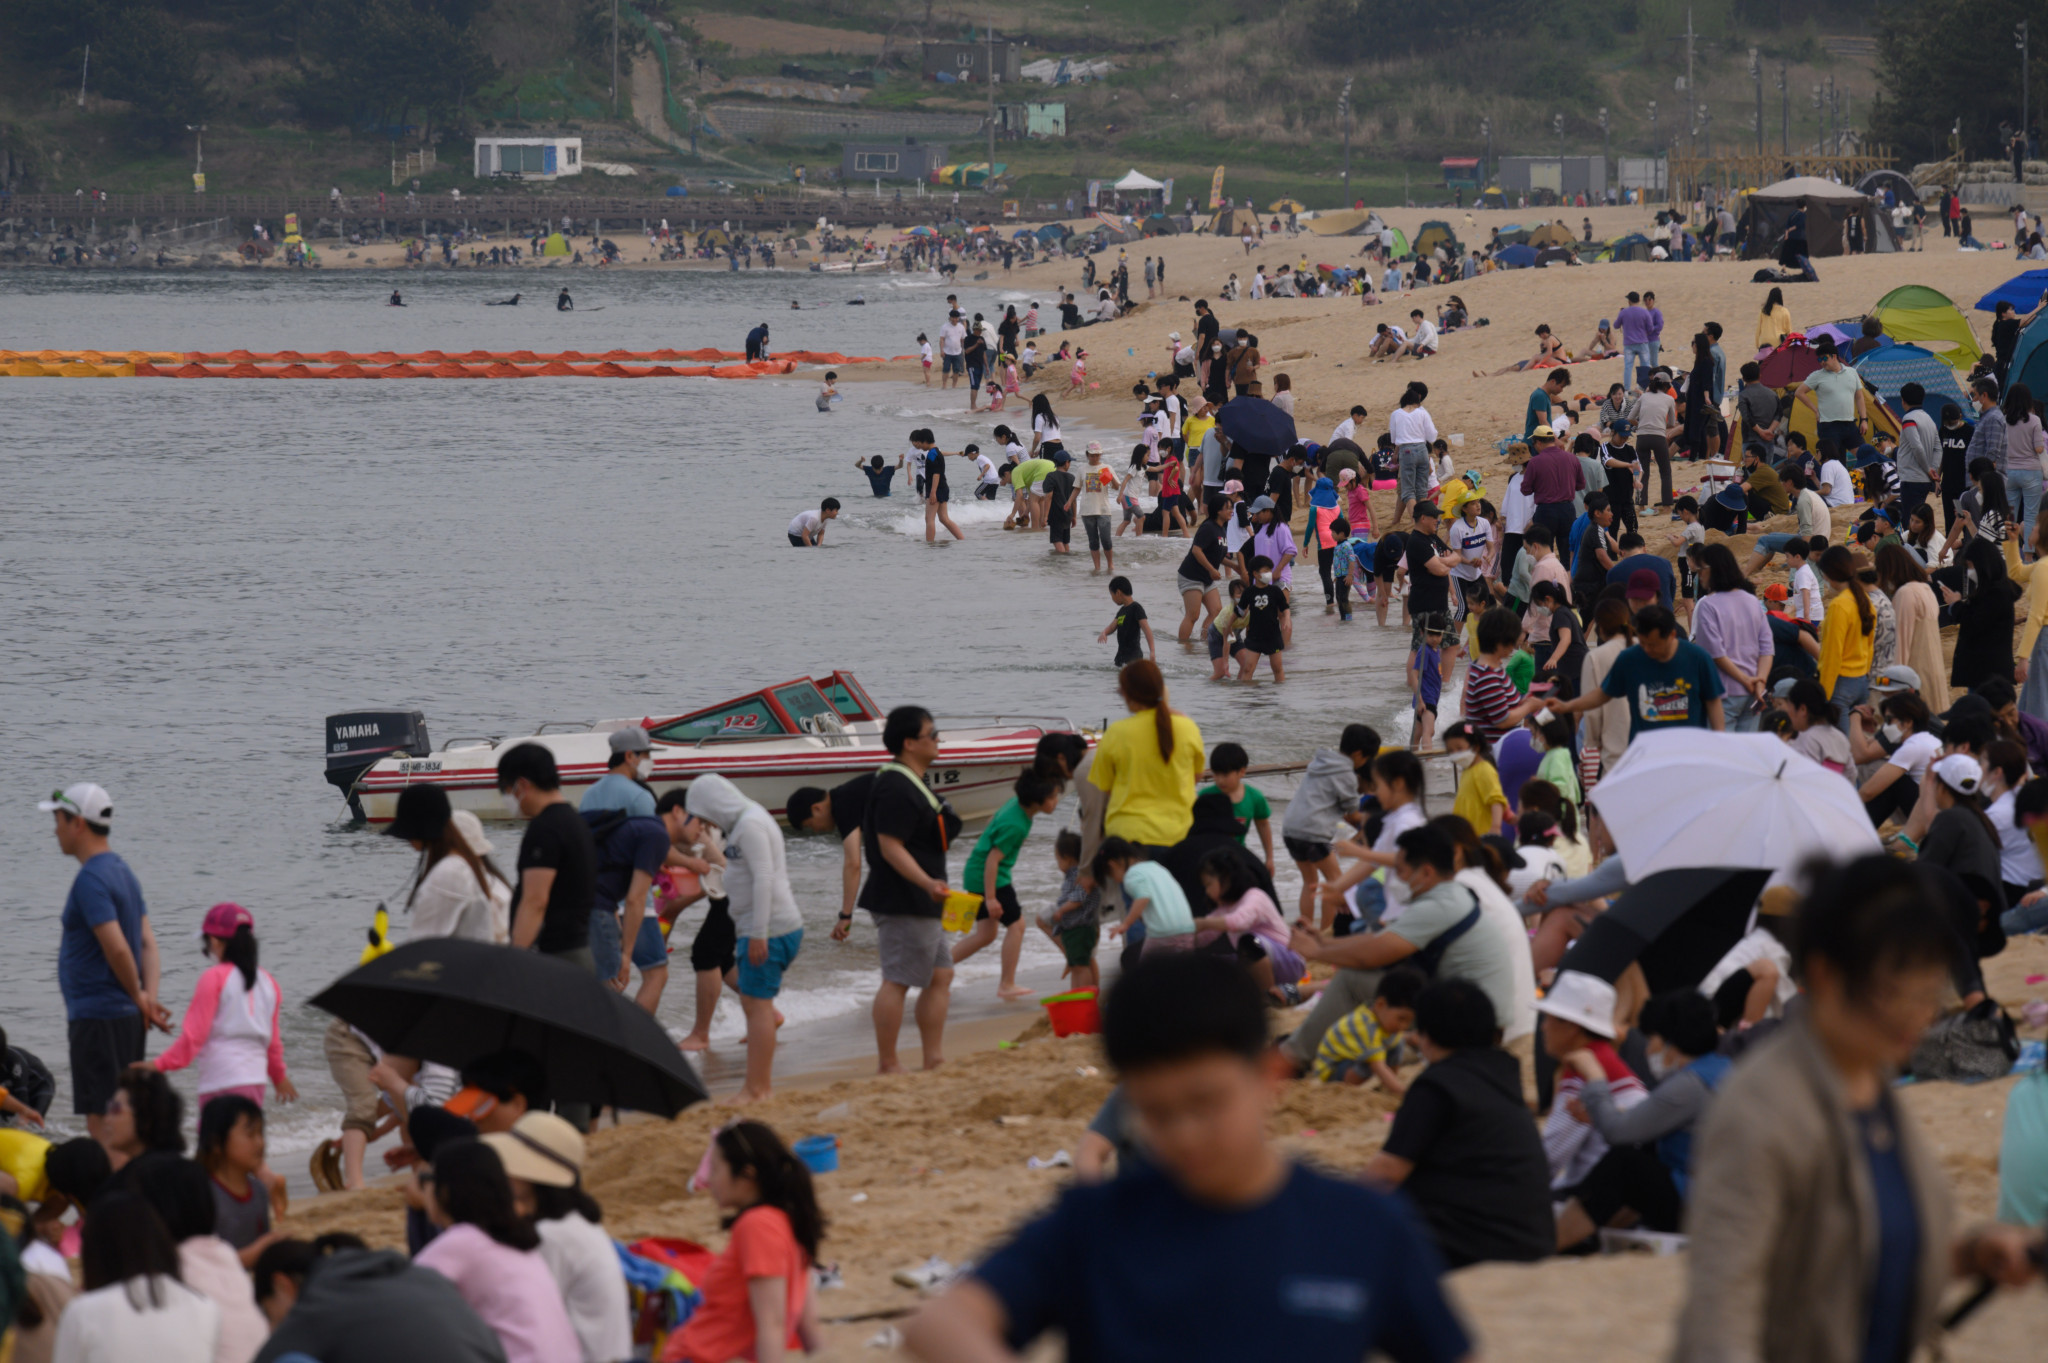 South Korea has reported few new COVID-19 cases lately and many headed to the beach this weekend ©Getty Images